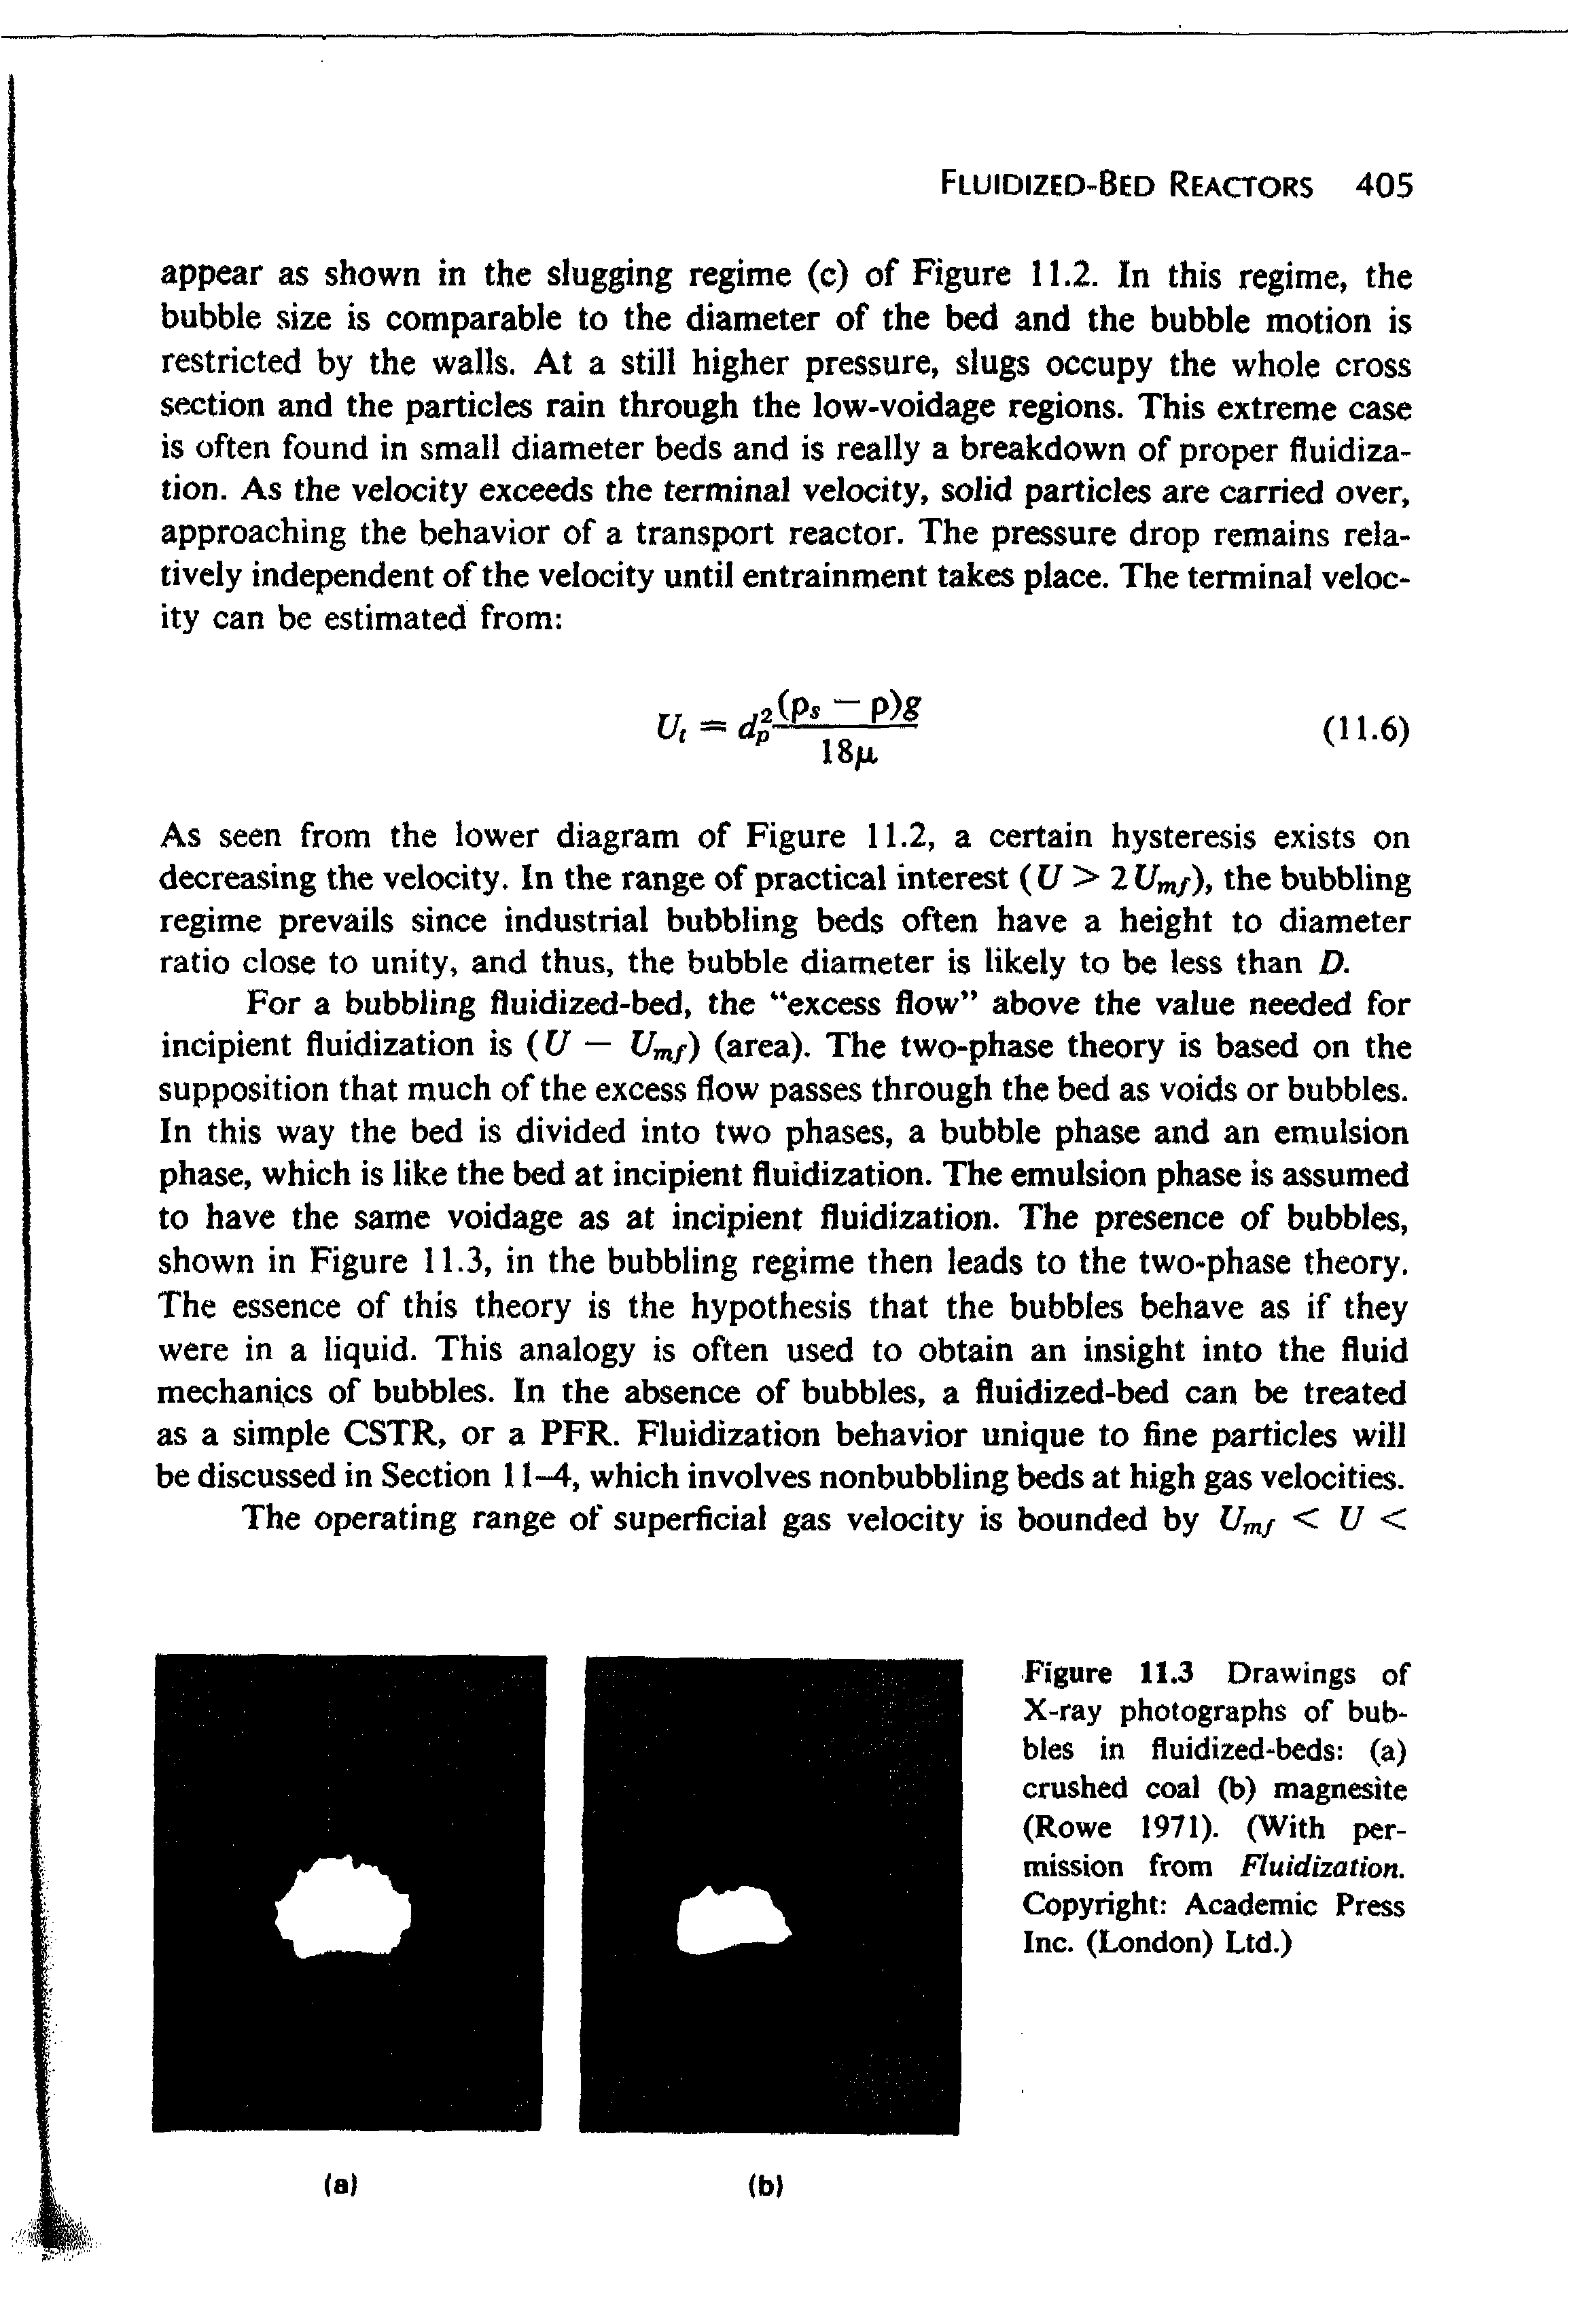 Figure 11.3 Drawings of X-ray photographs of bubbles in fluidized-beds (a) crushed coal (b) magnesite (Rowe 1971). (With permission from Fluidization. 05pyright Academic Press Inc. (London) Ltd.)...